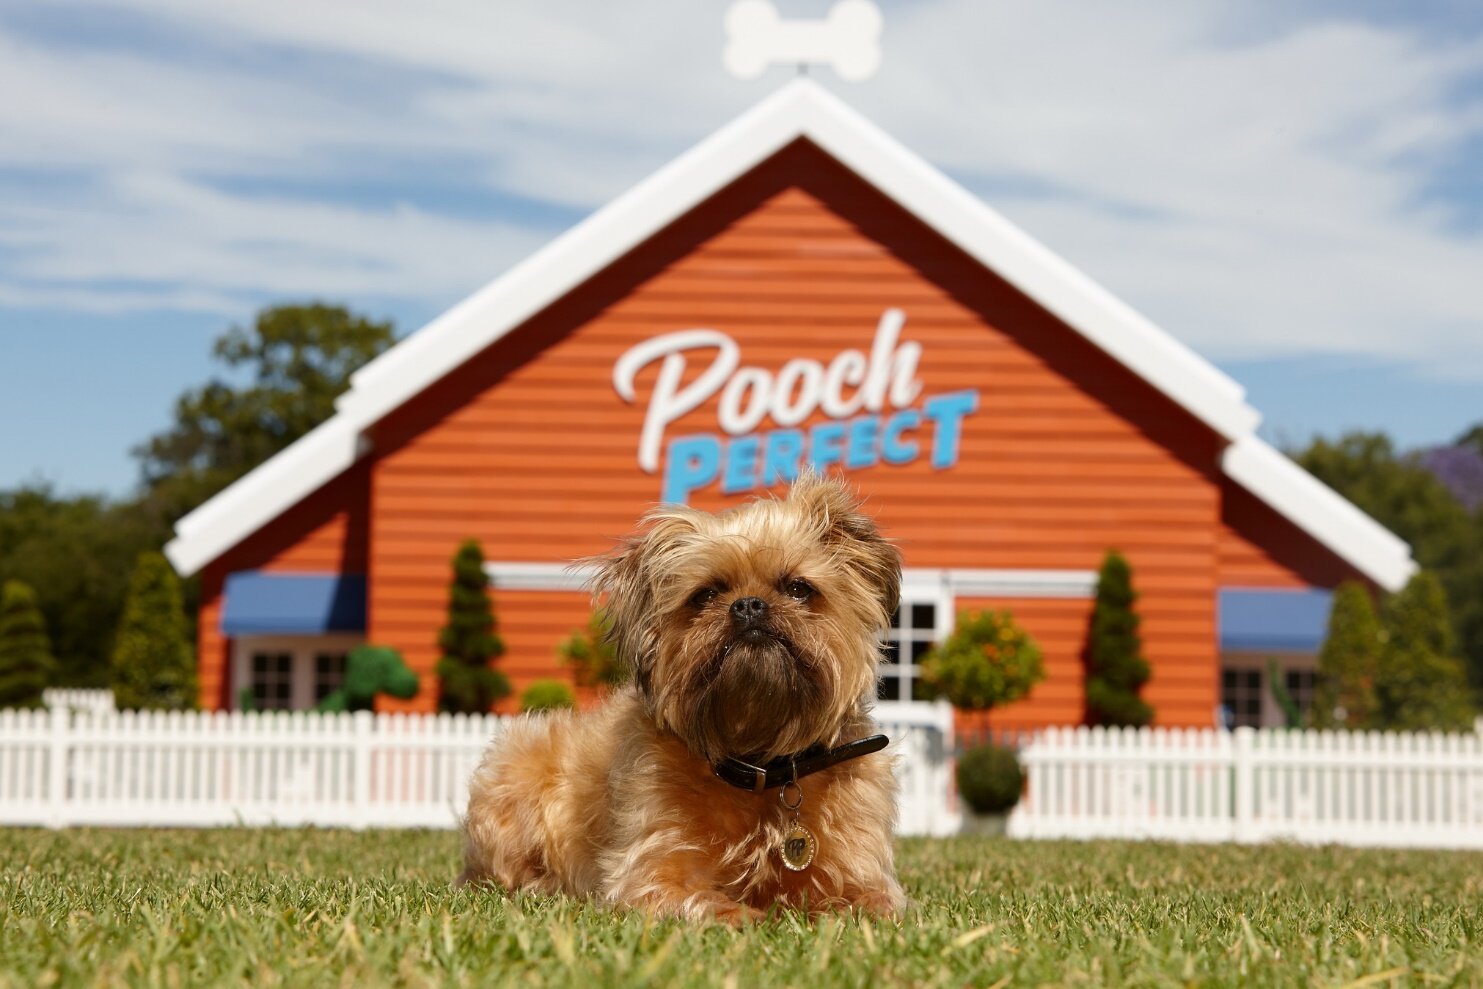   Pooch Perfect  Source: Seven Network 